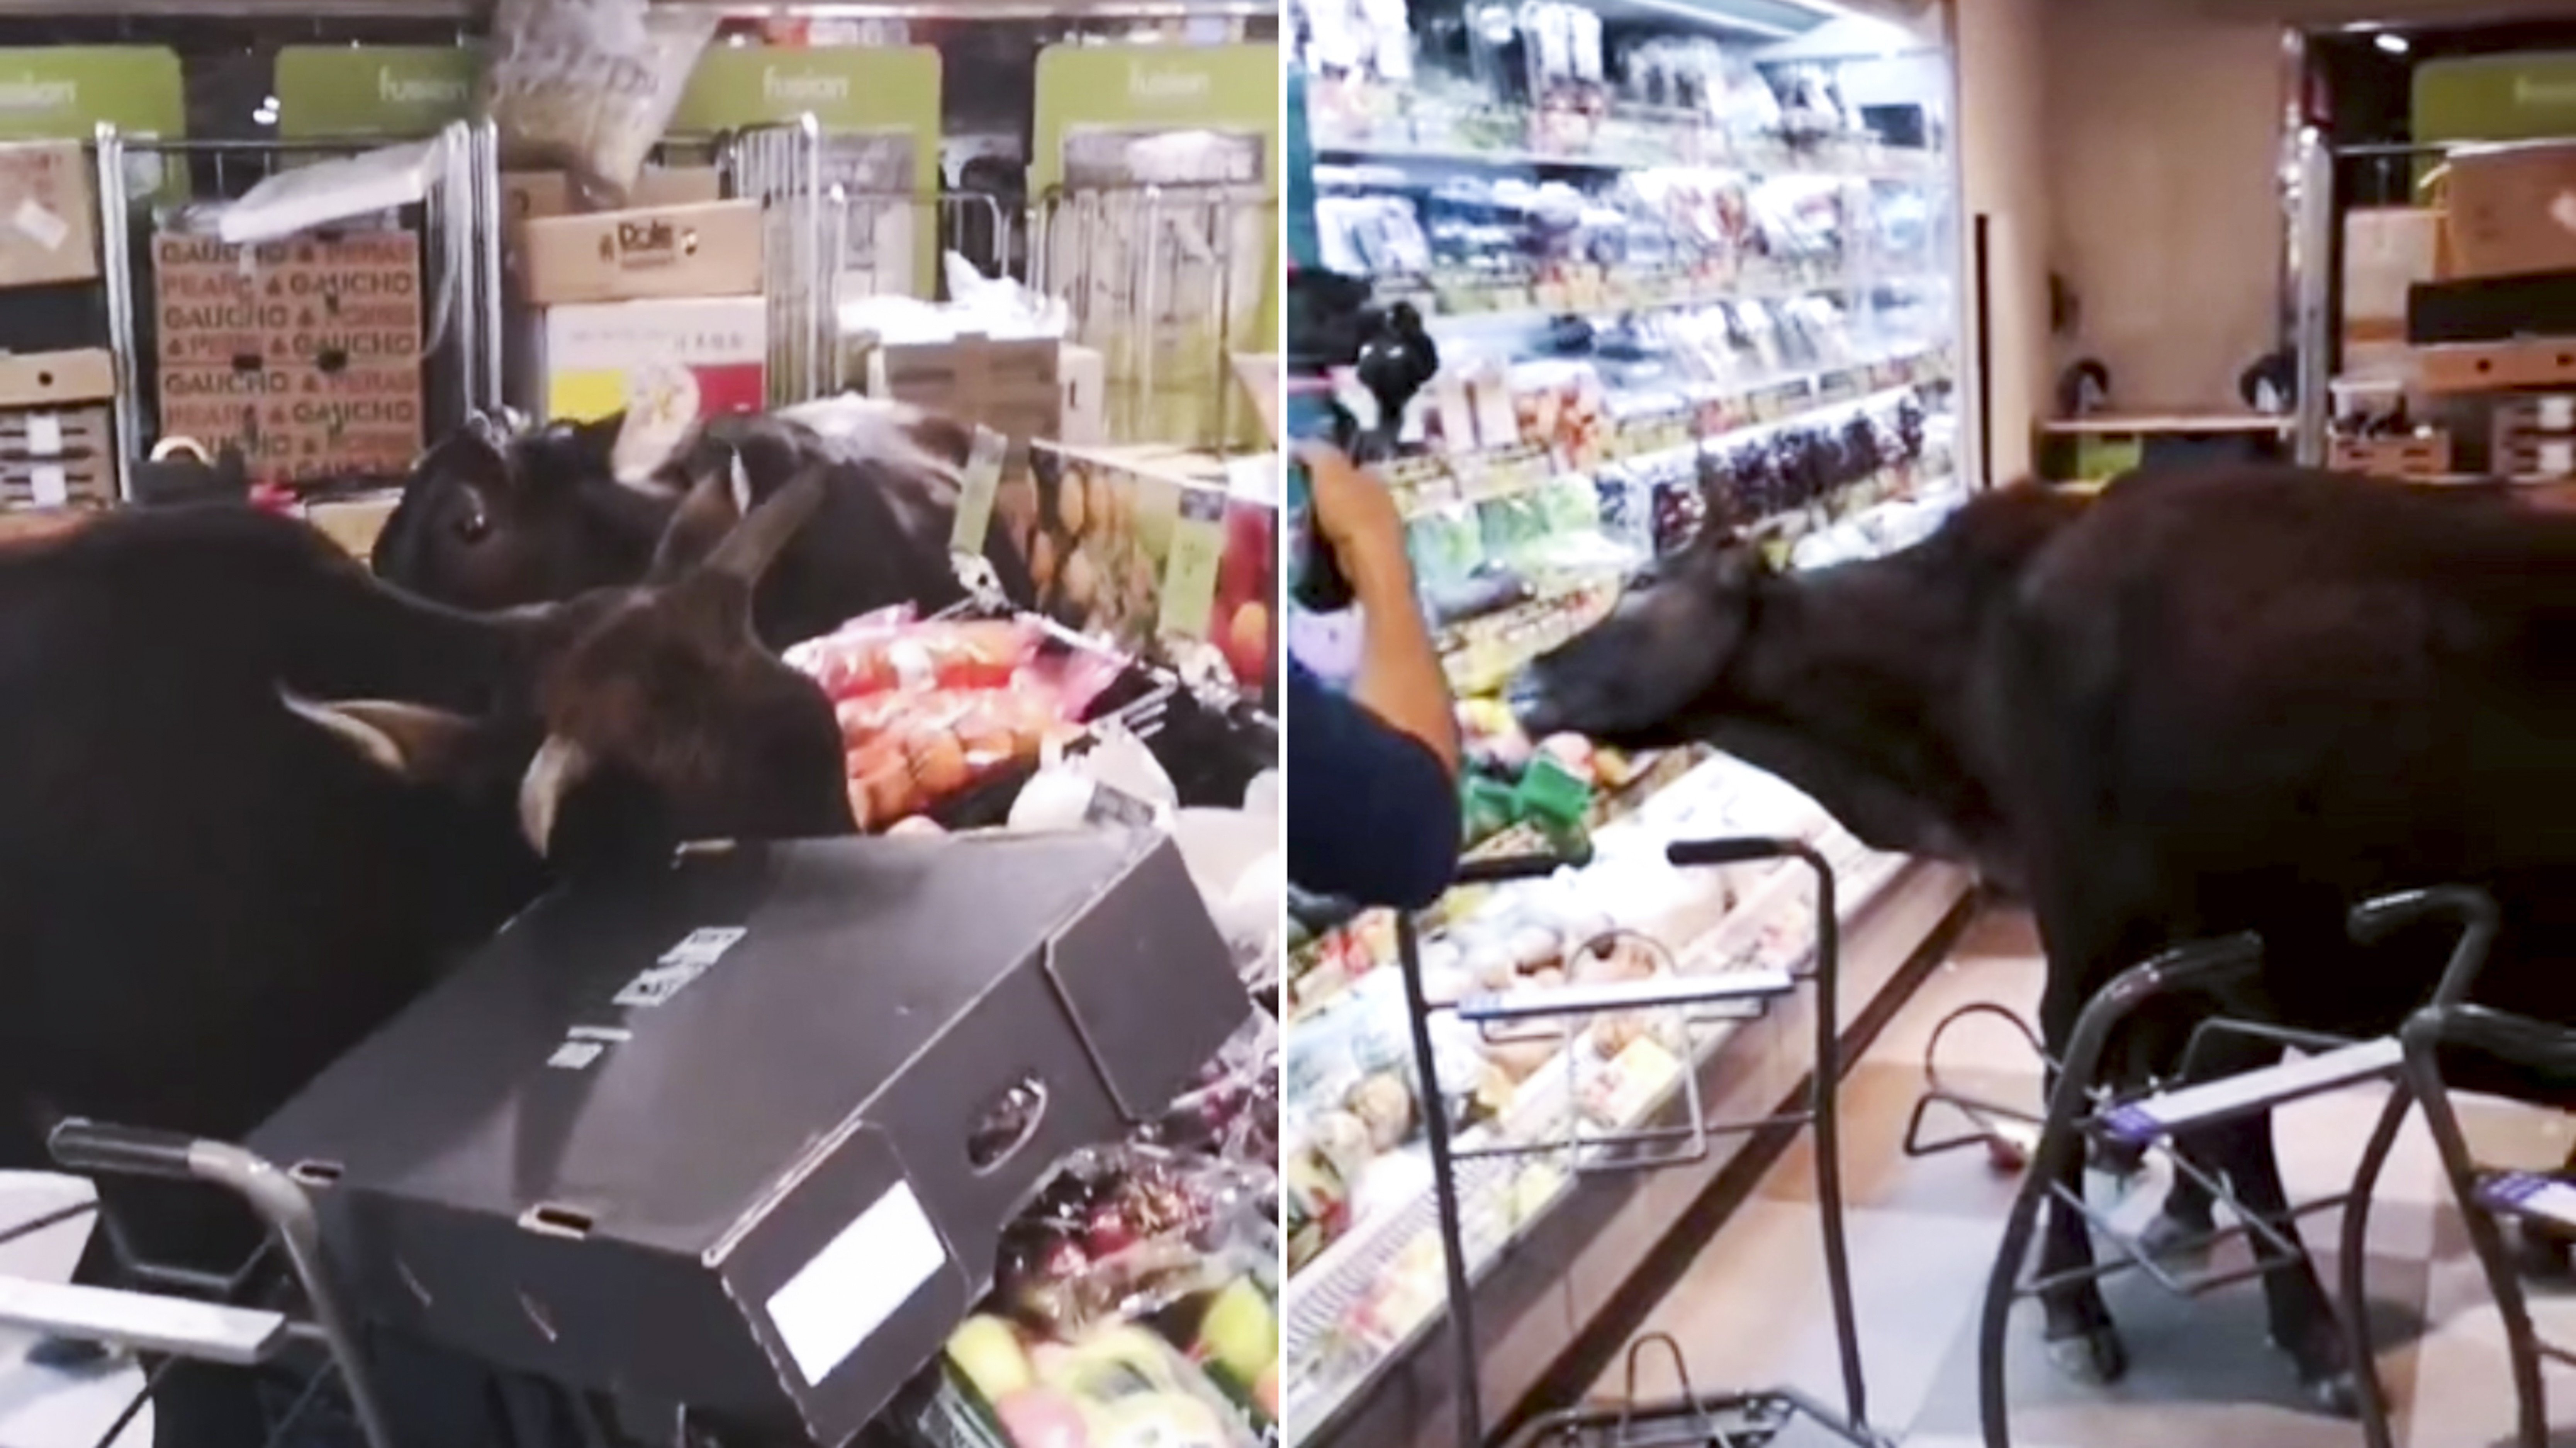 A group of stray bulls were filmed roaming through a ParknShop in Mui Wo, helping themselves to fruit displayed in cold storage units and shelves. Photo: Facebook